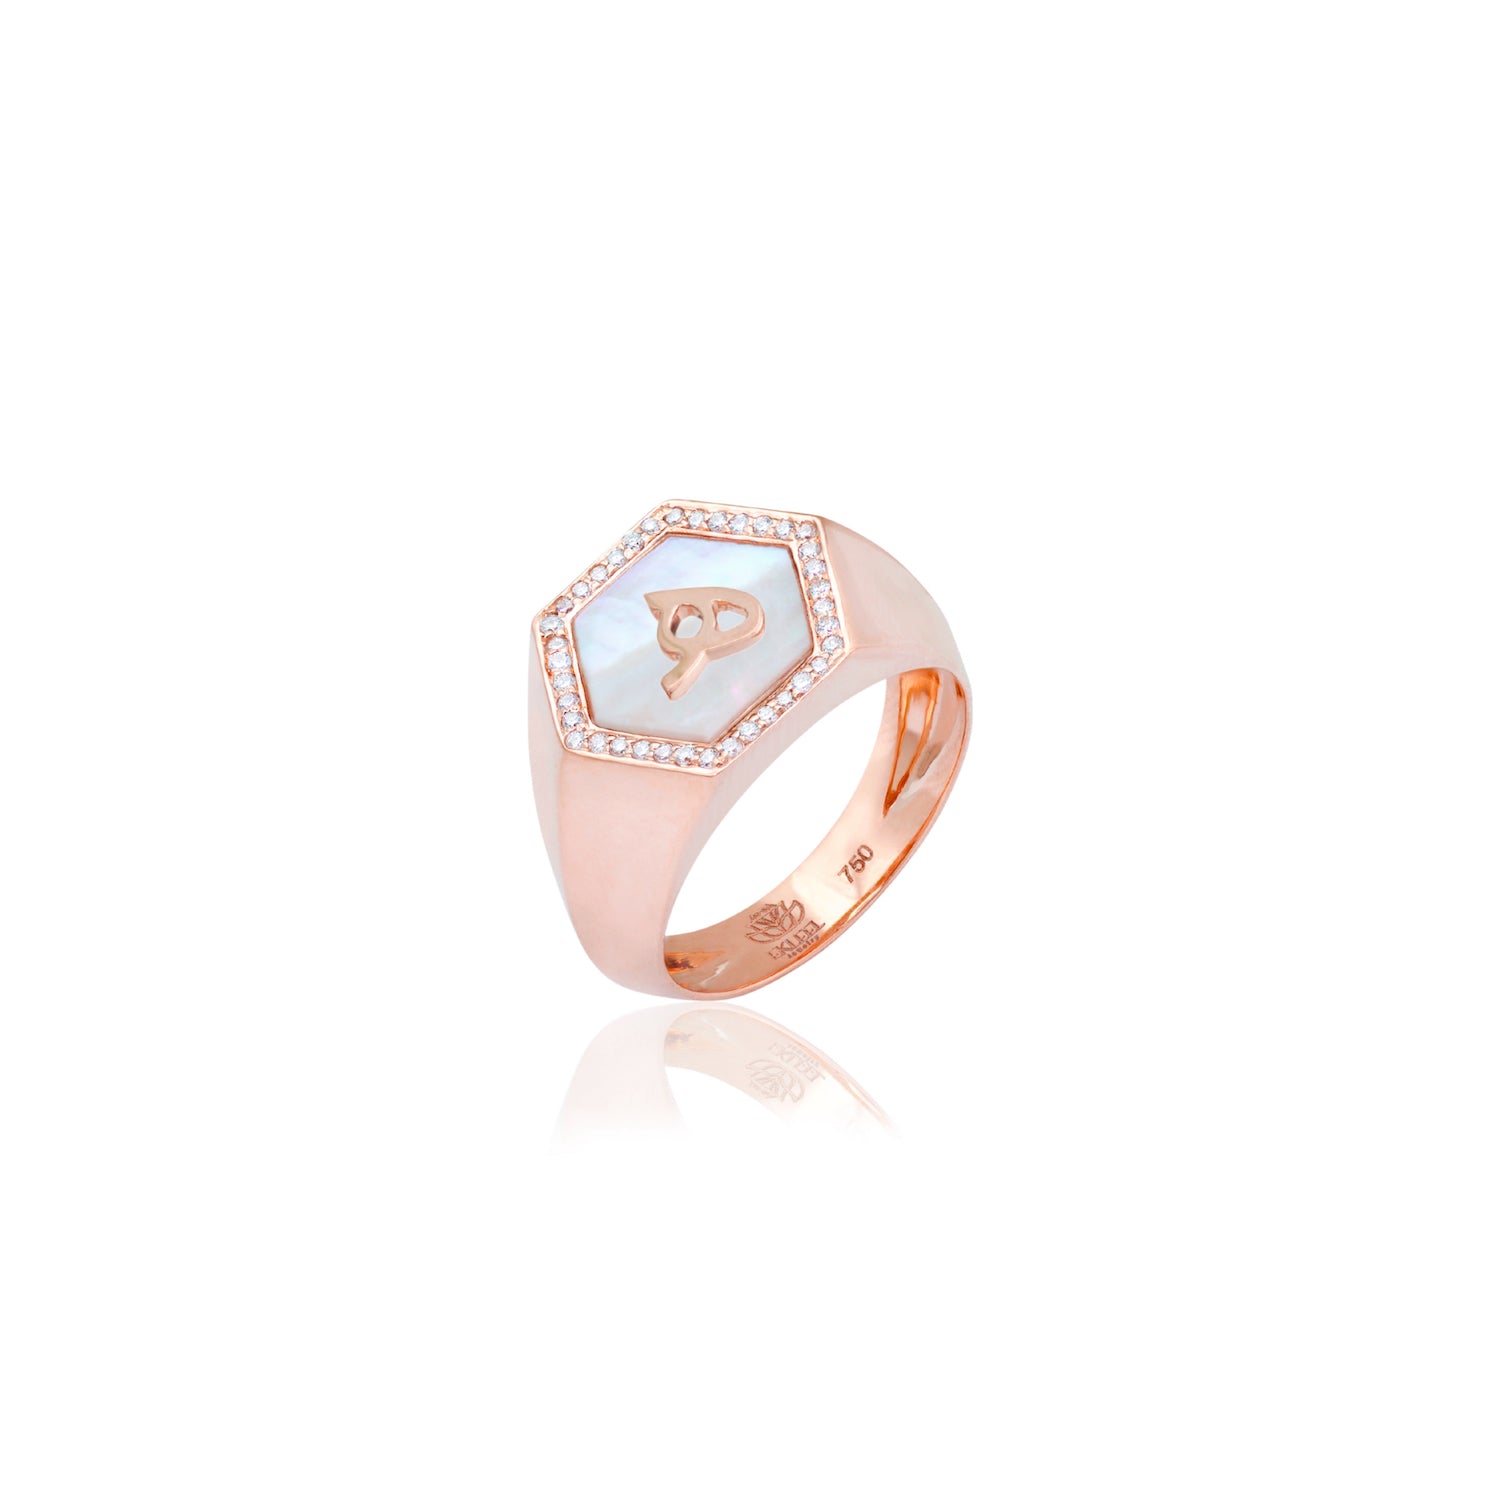 Qamoos 2.0 Letter هـ White Mother of Pearl and Diamond Signet Ring in Rose Gold